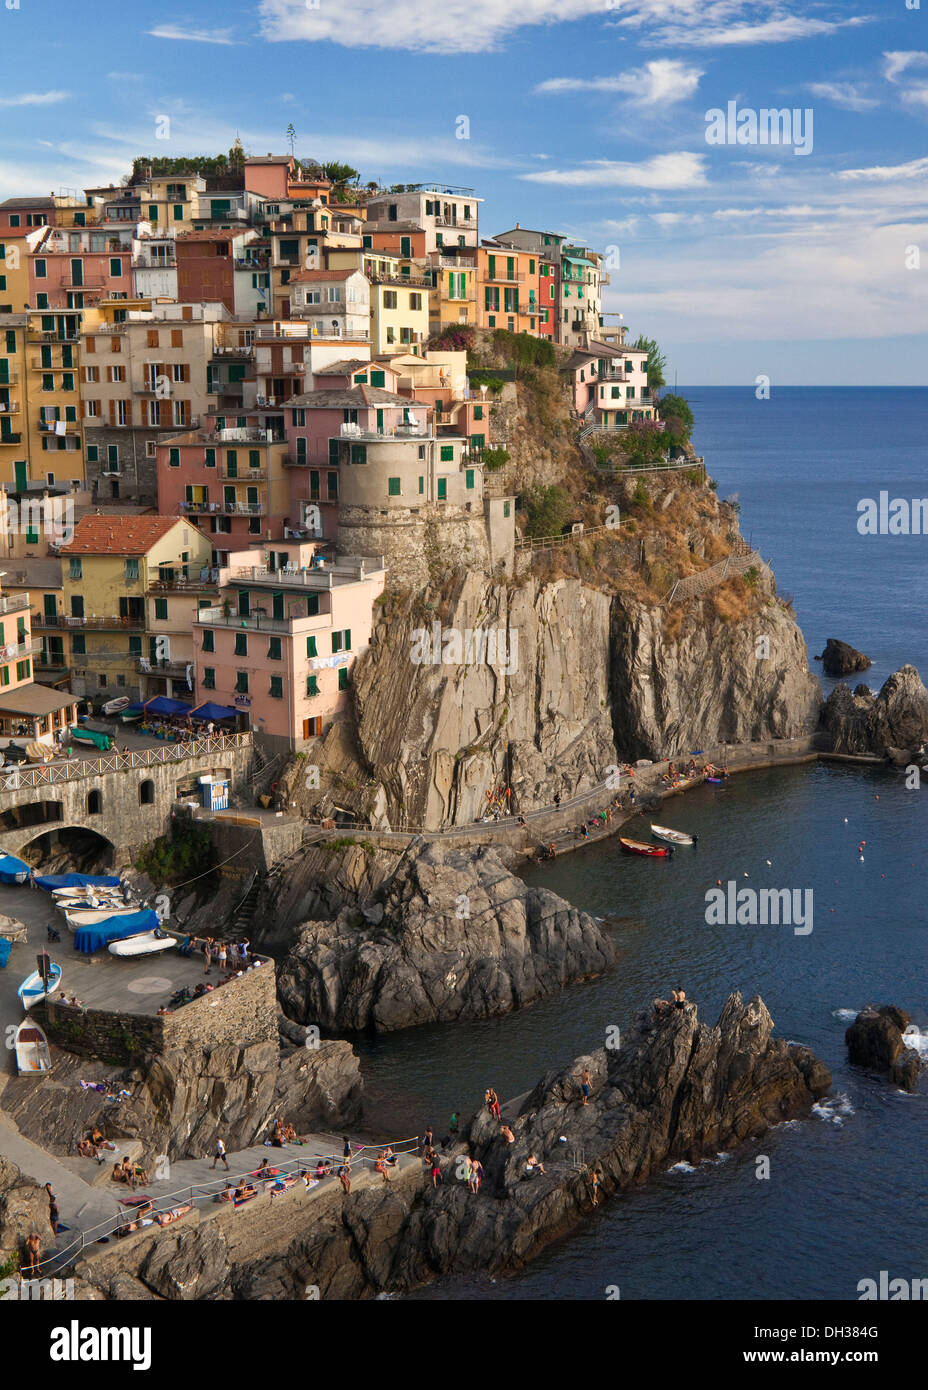 The harbour and cliff side town of Manarola, Cinque Terre, Italy Stock Photo